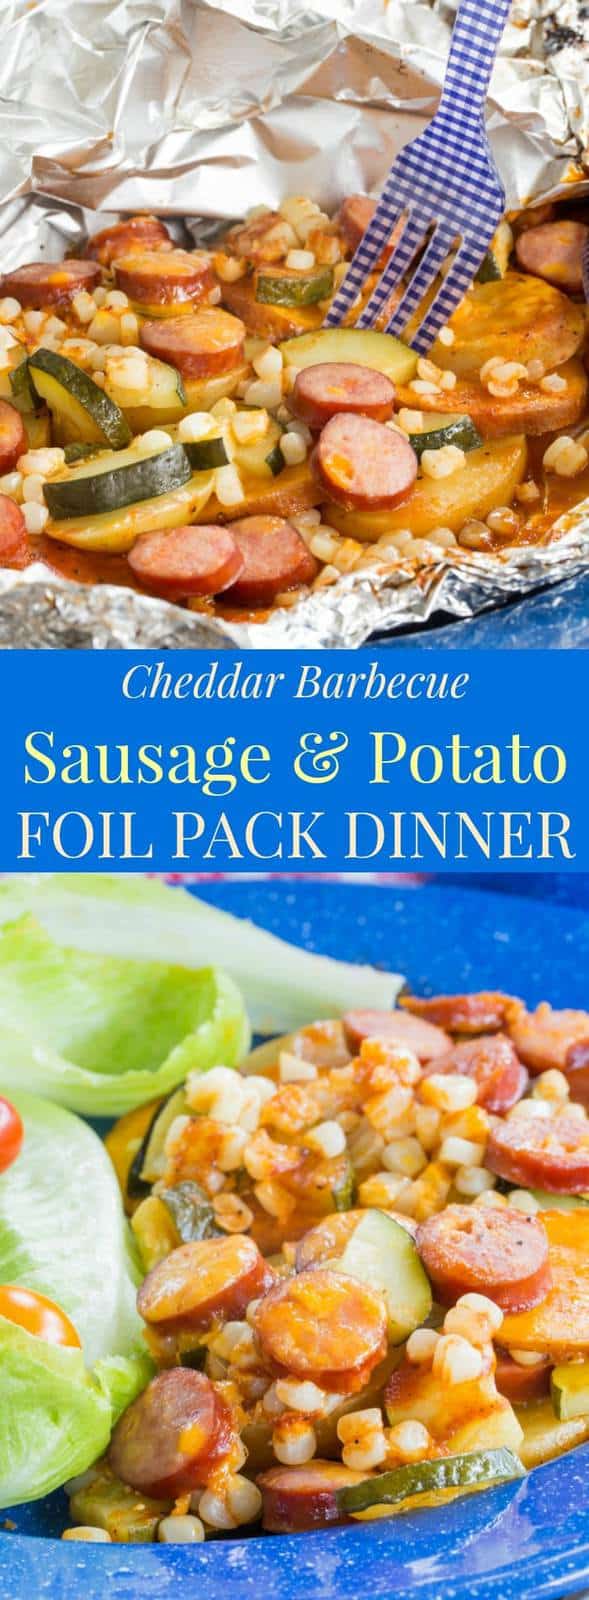 Cheddar Barbecue Sausage and Potato Foil Pack Dinner - a simple recipe with easy cleanup for cooking on a campfire or reliving camping memories at home made with @jvillesausage. Gluten free. #ad | cupcakesandkalechips.com